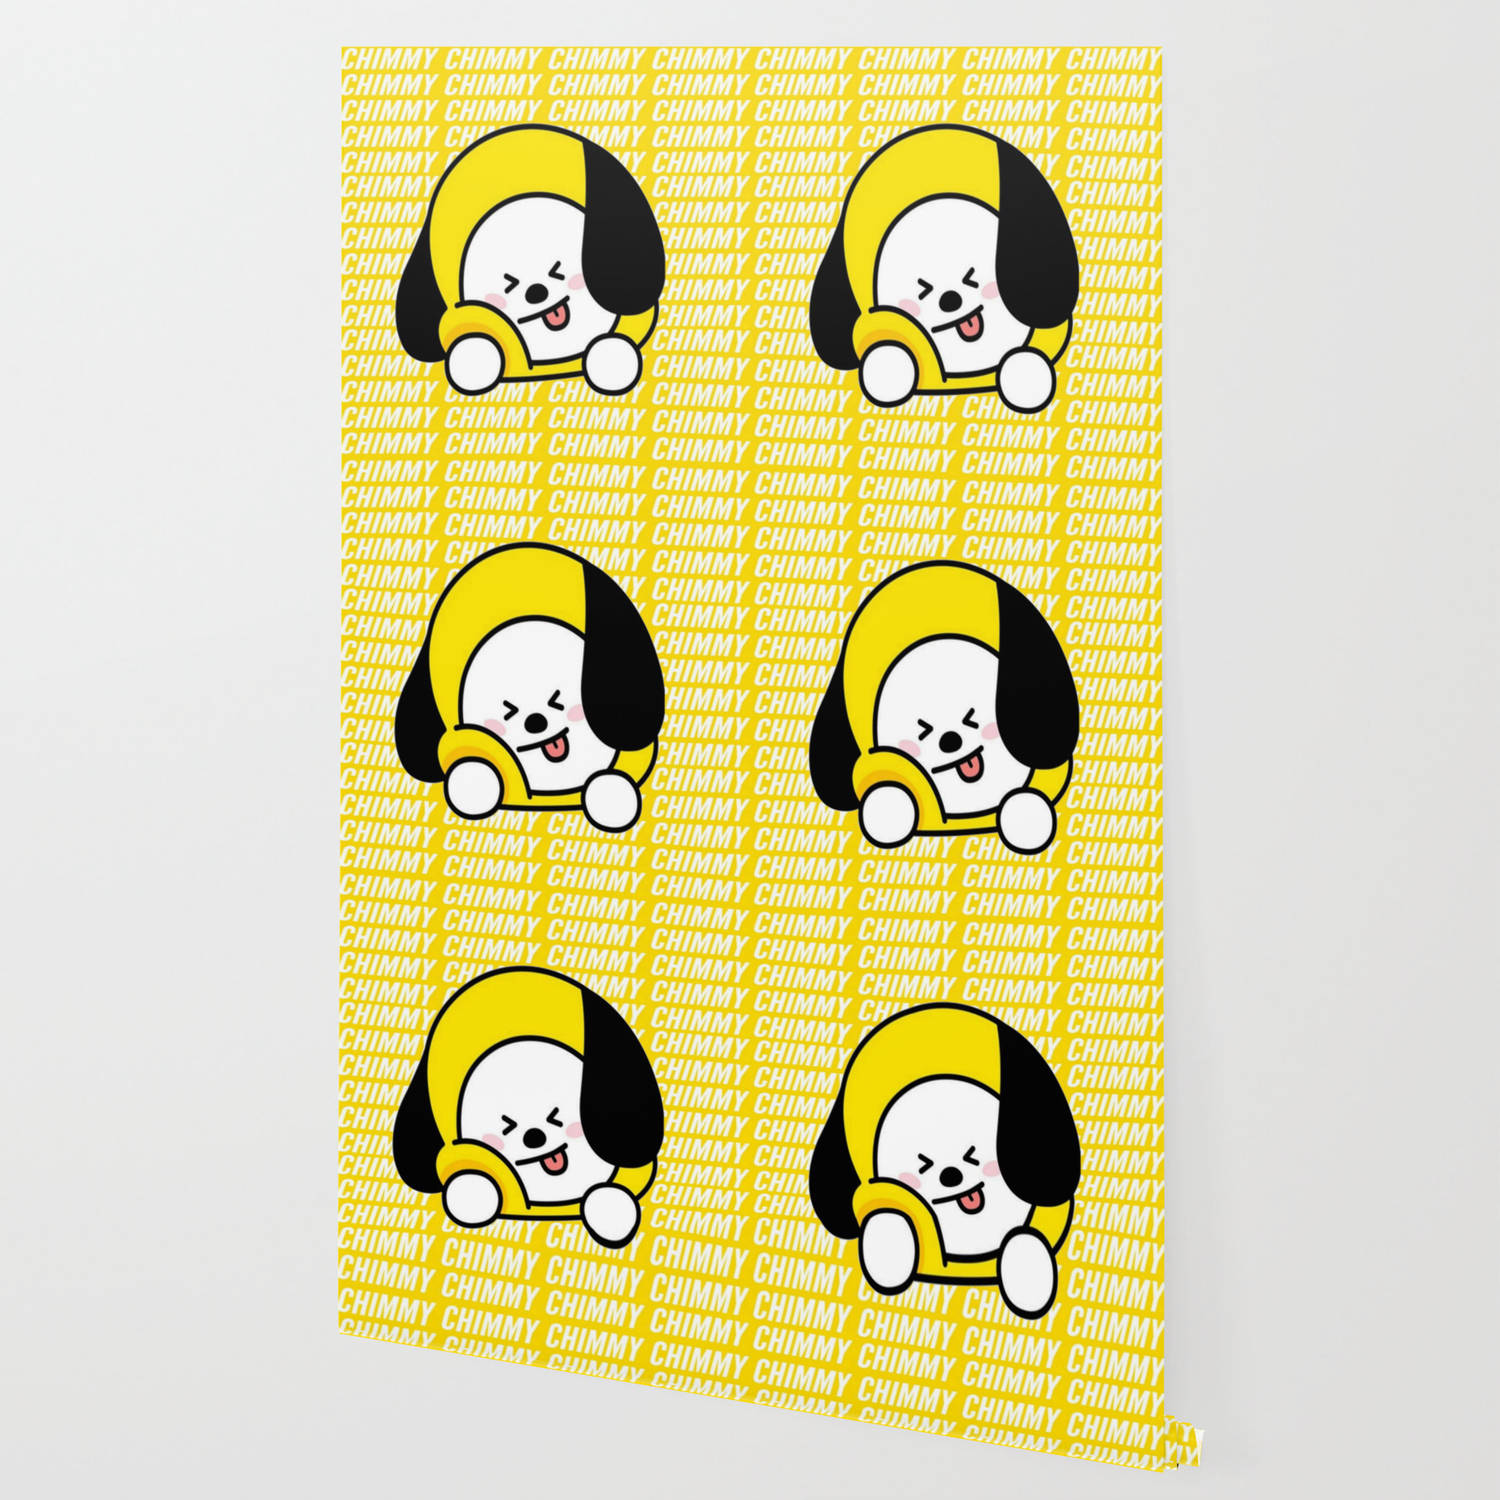 Chimmy Bt21 Poster Background